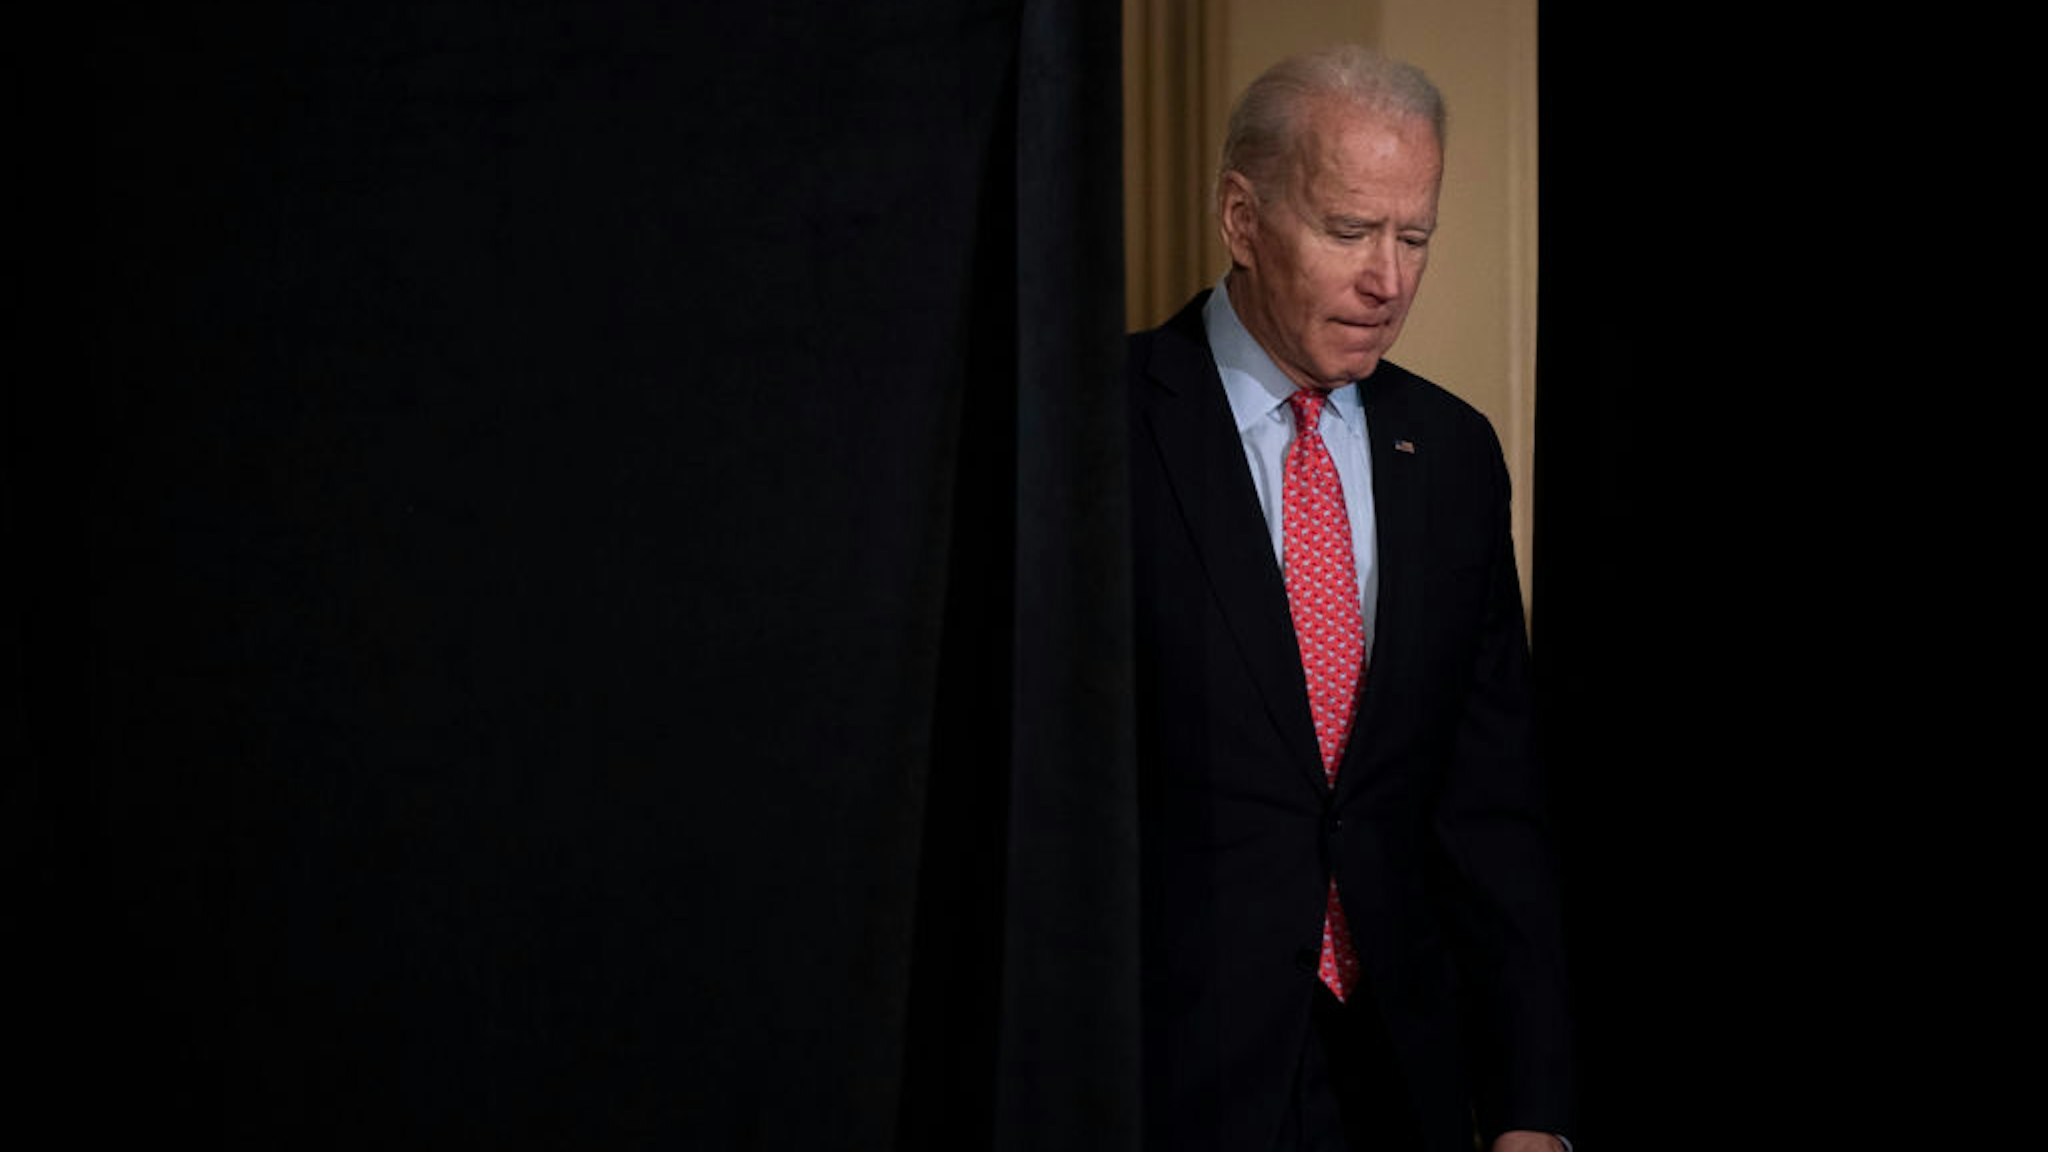 Democratic presidential candidate former Vice President Joe Biden arrives to deliver remarks about the coronavirus outbreak, at the Hotel Du Pont March 12, 2020 in Wilmington, Delaware.